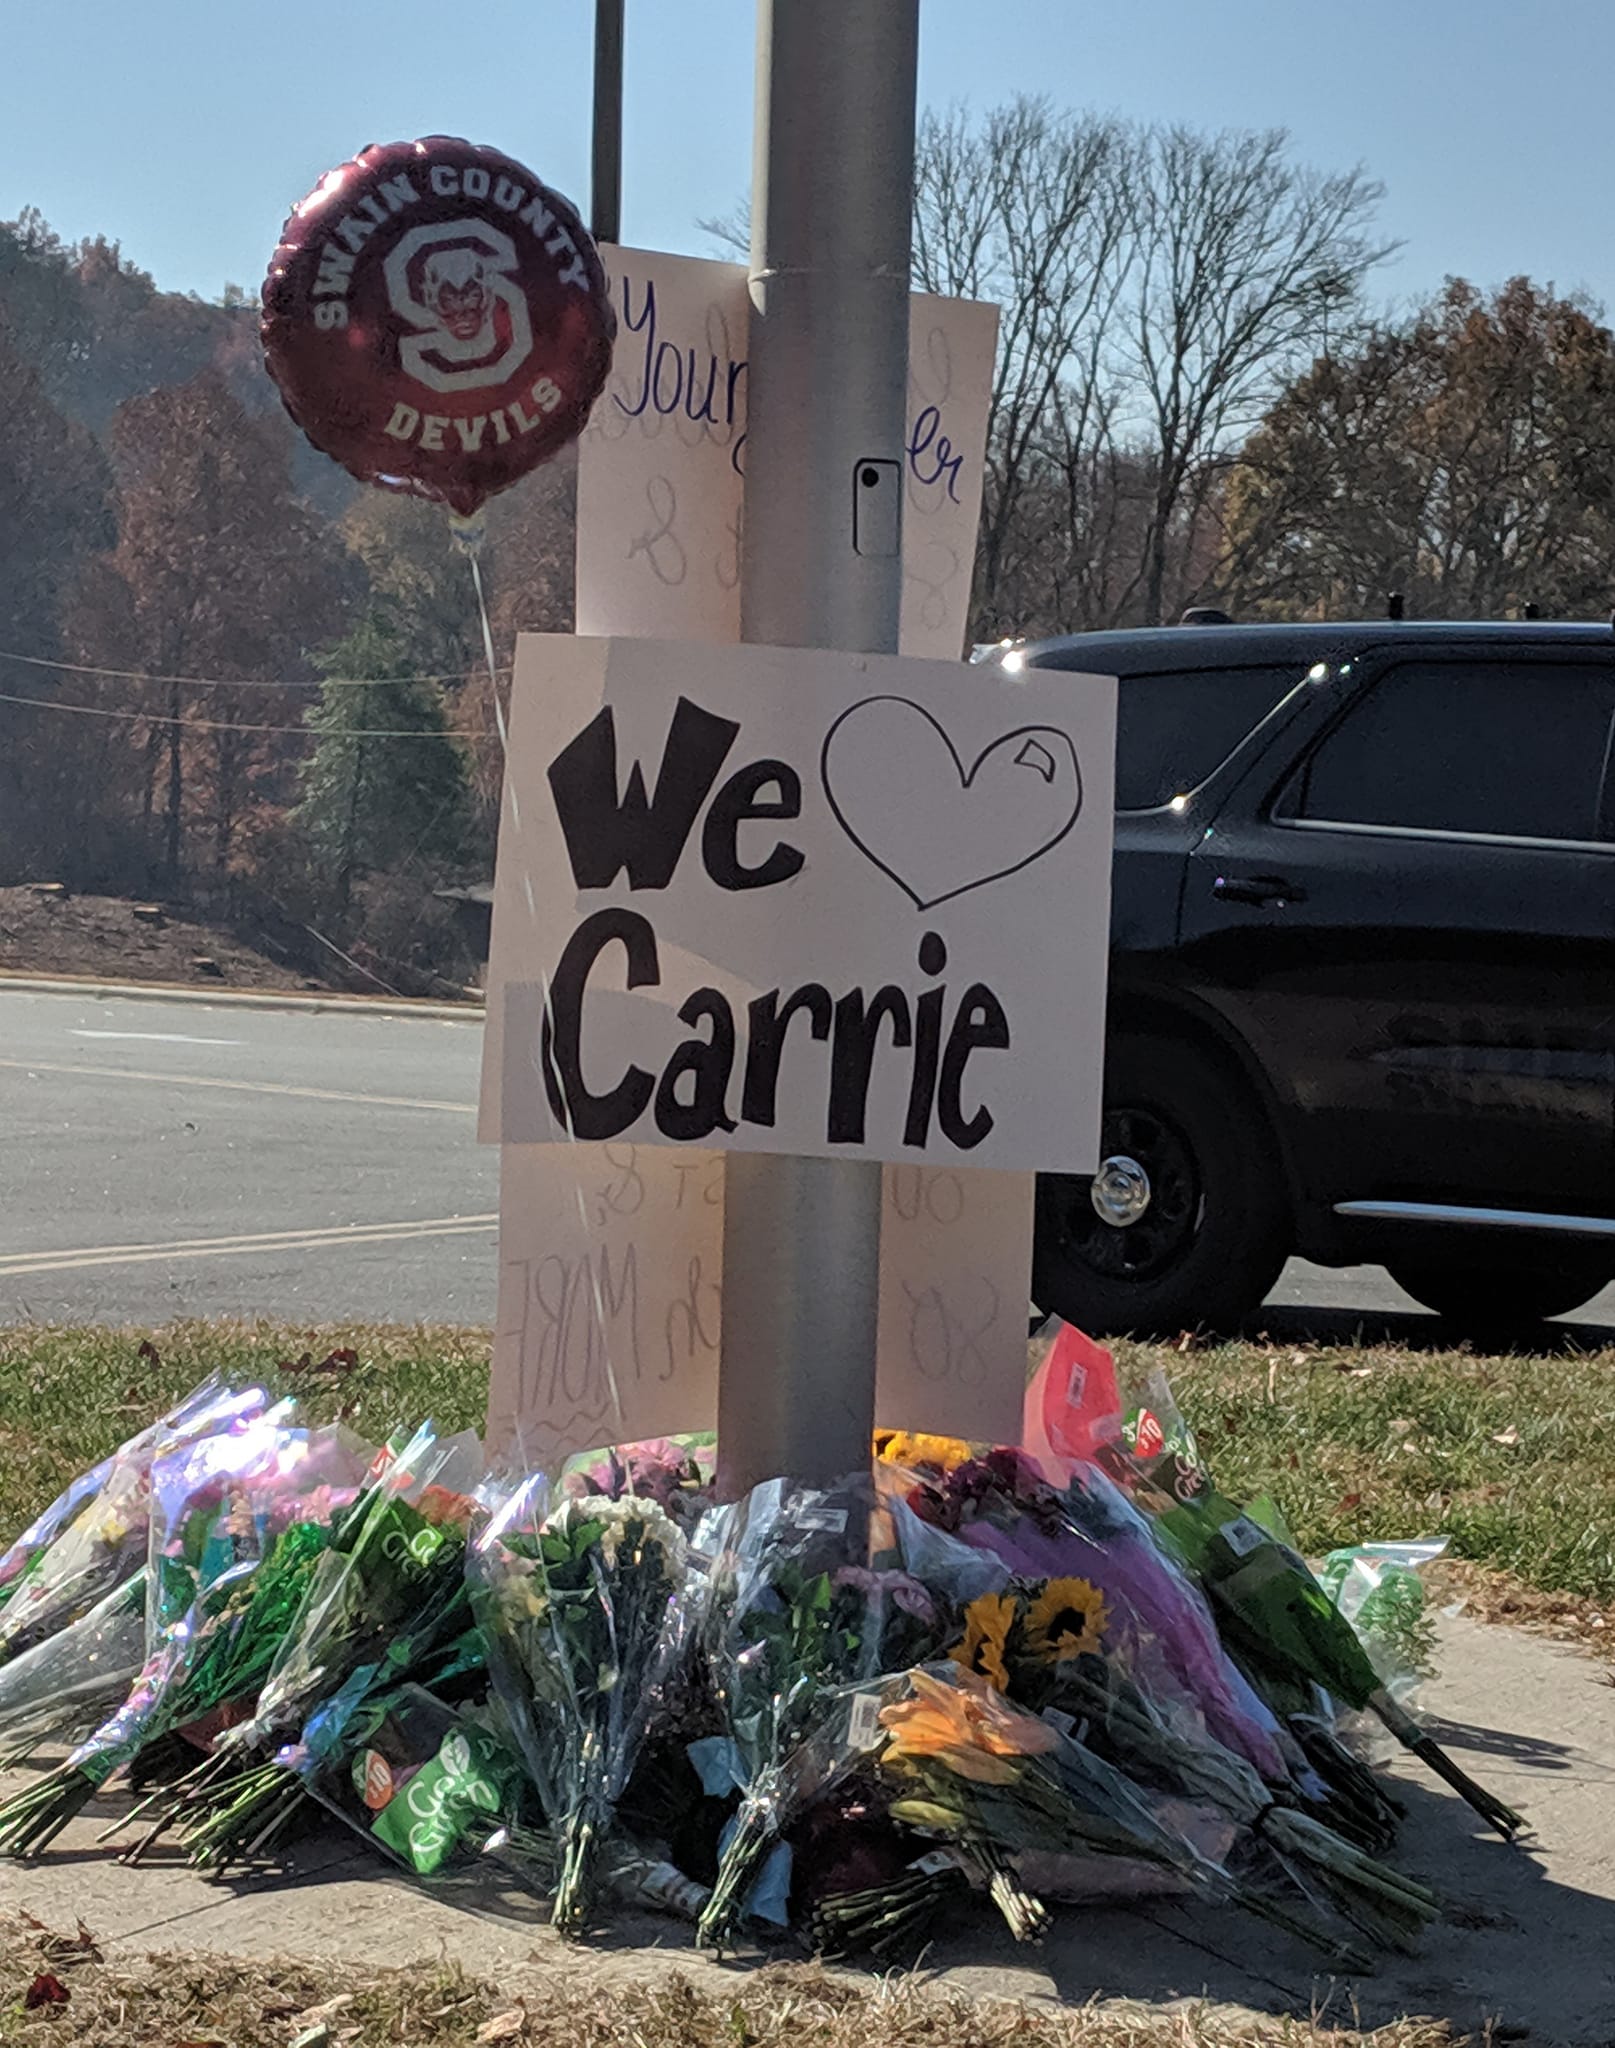 Swain High School had a ceremony on Tuesday in front of the school on Tuesday. At left, posters, balloons and flowers were left in memory of the beloved athletic trainer who made a positive impact on so many lives.